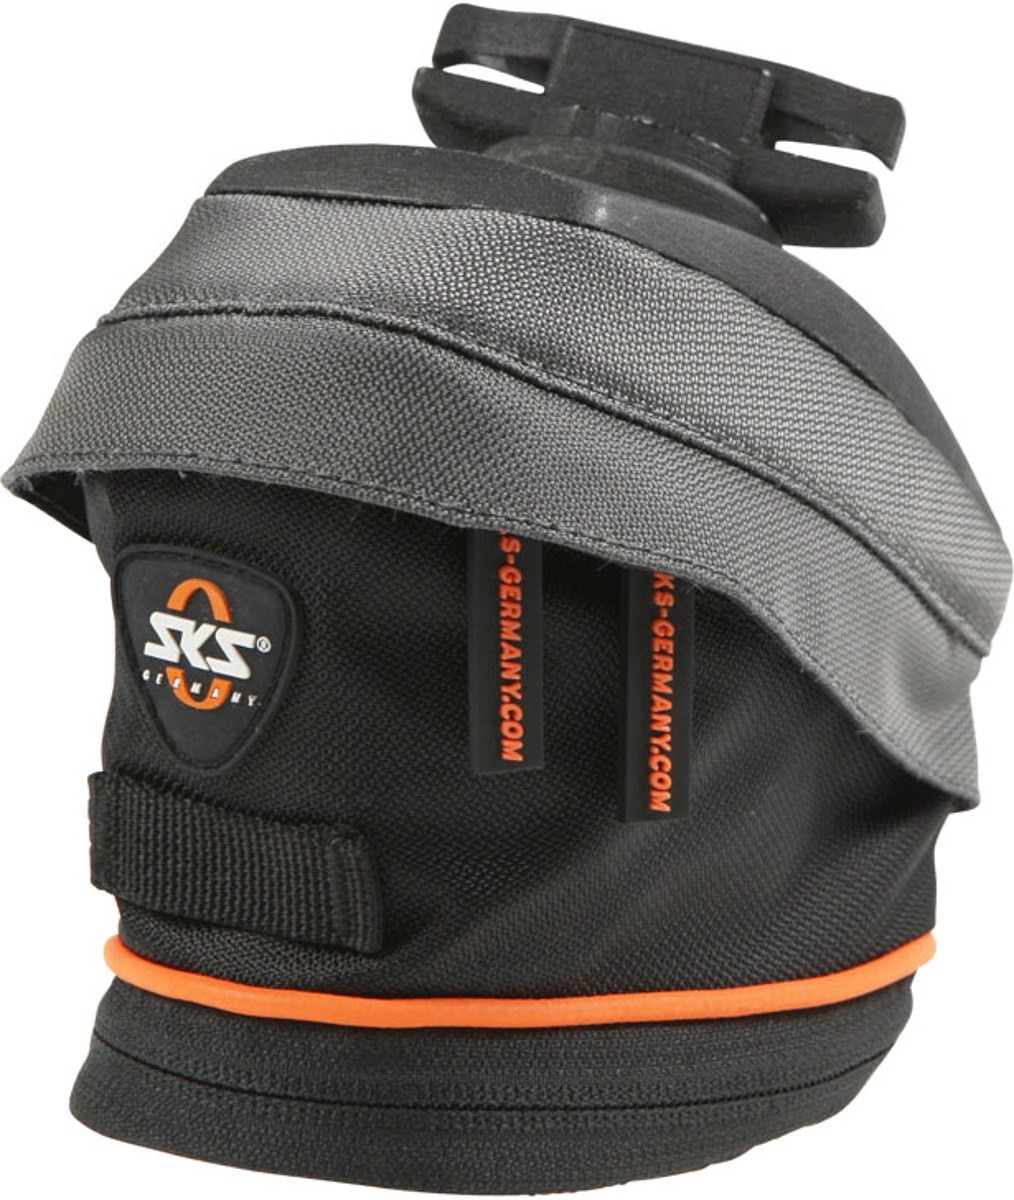 SKS Race Bag Seat Pack product image